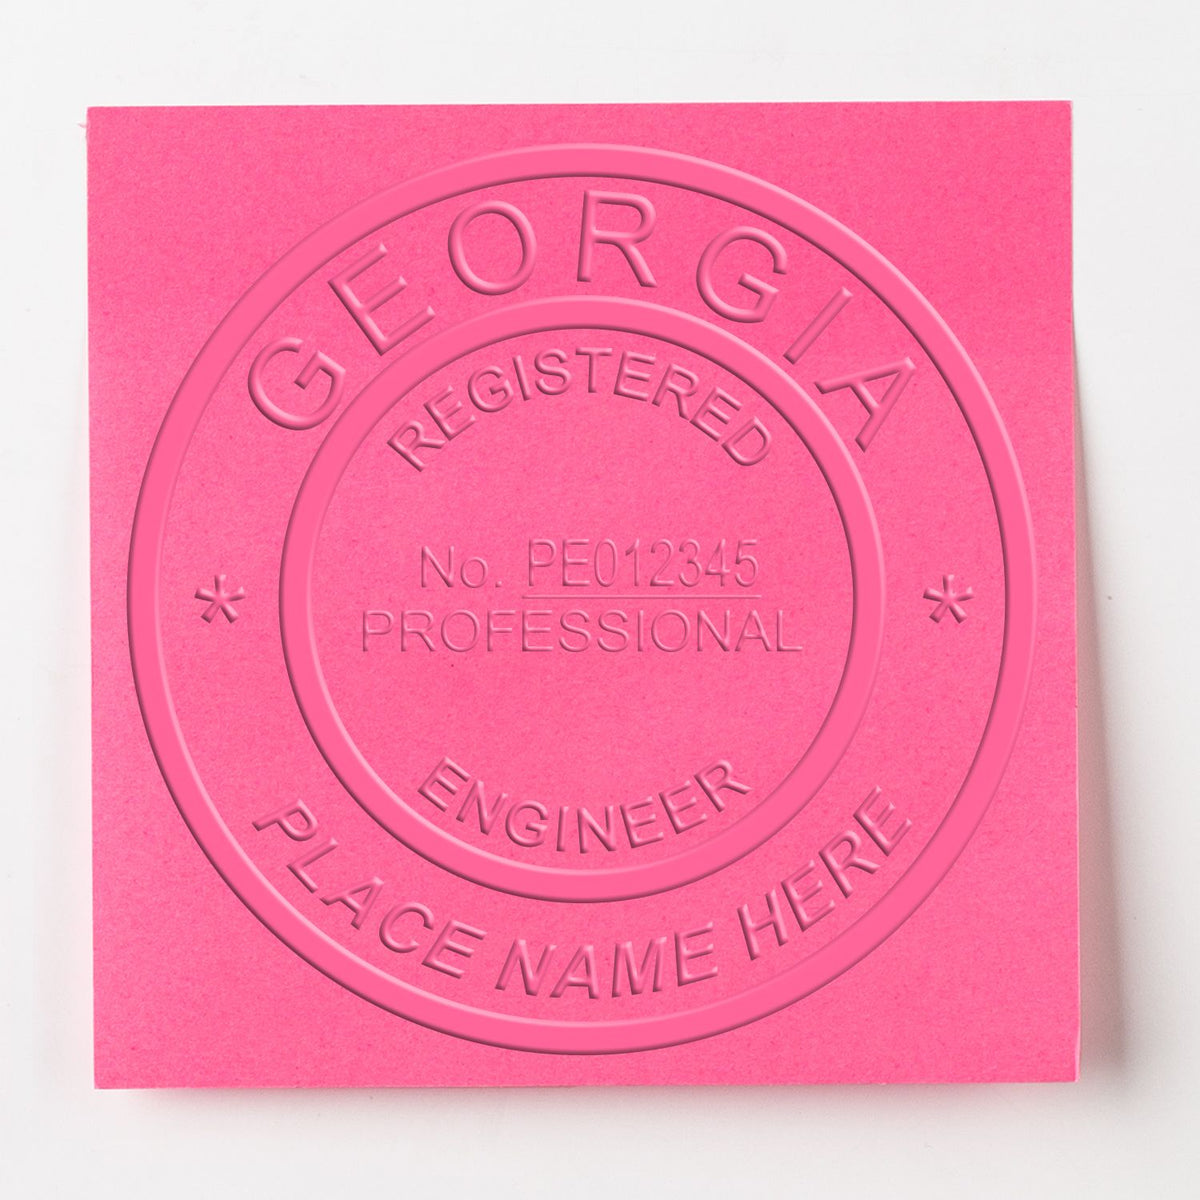 This paper is stamped with a sample imprint of the Soft Georgia Professional Engineer Seal, signifying its quality and reliability.